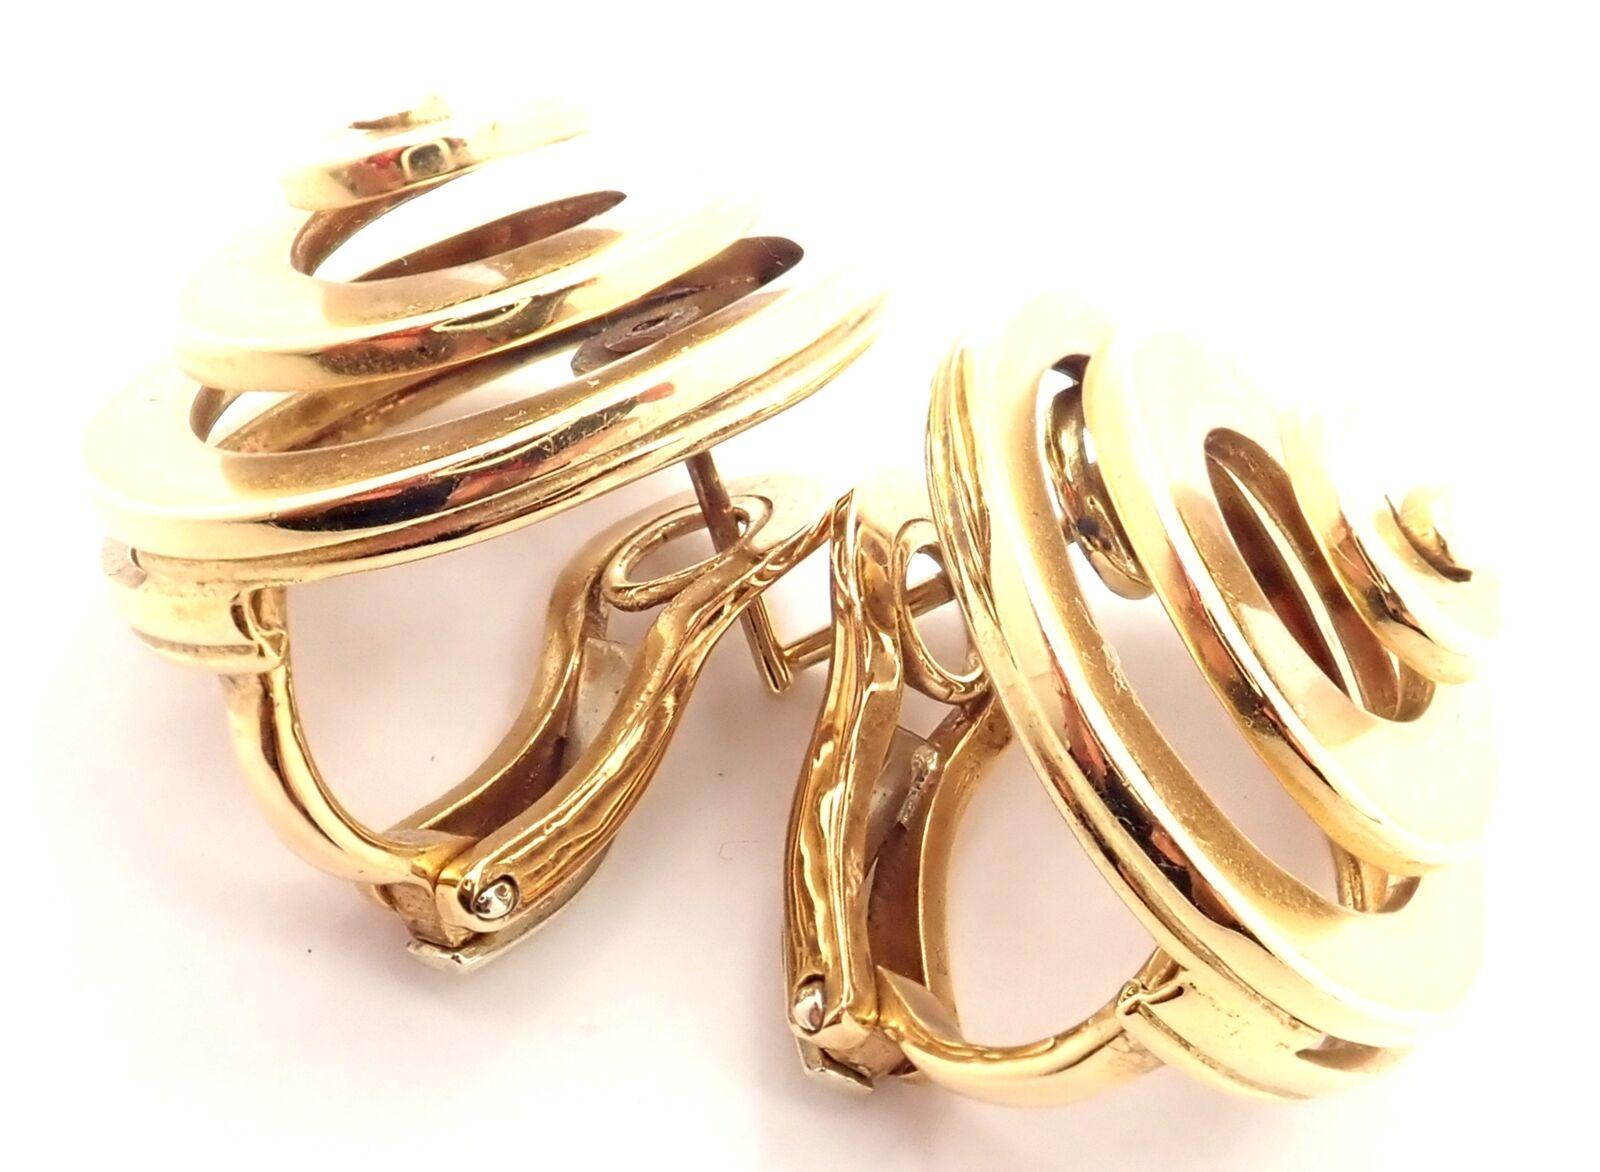 18k Yellow Gold Vintage Swirl Earrings by Bulgari. 
These earrings are made for pierced ears.
Details: 
Measurements: 21mm
Weight: 18.4 grams
Stamped Hallmarks: Bvlgari 750 
*Free Shipping within the United States*
YOUR PRICE: $5,900
T3154ordd